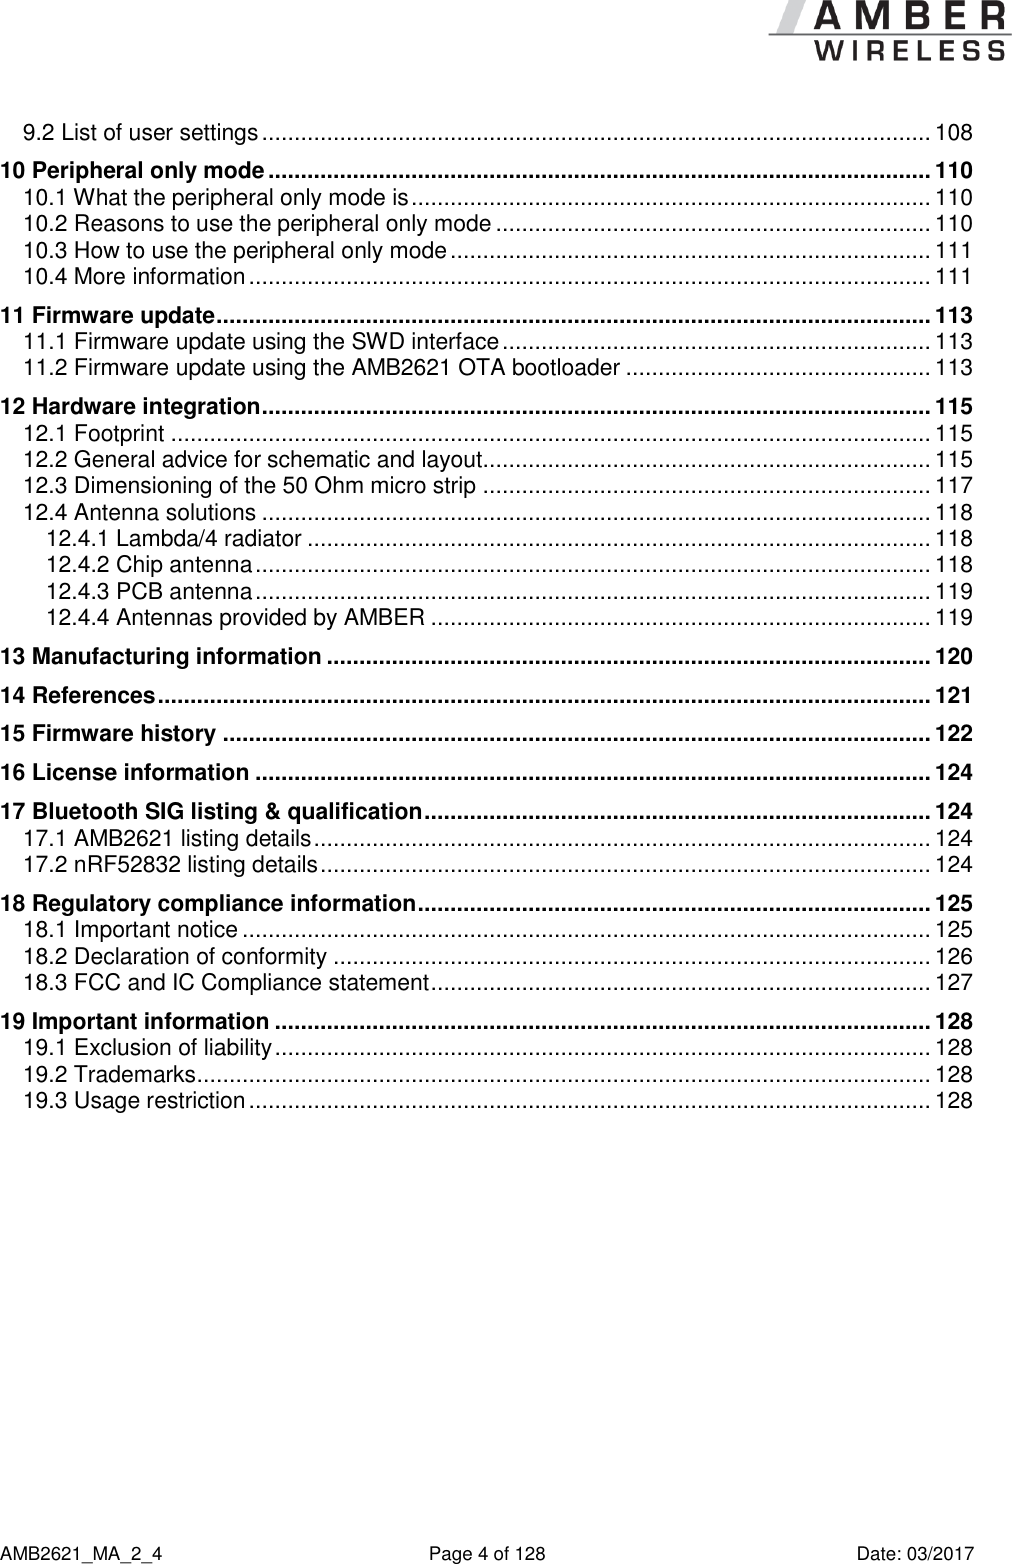      AMB2621_MA_2_4  Page 4 of 128  Date: 03/2017 9.2 List of user settings ....................................................................................................... 108 10 Peripheral only mode ...................................................................................................... 110 10.1 What the peripheral only mode is ................................................................................ 110 10.2 Reasons to use the peripheral only mode ................................................................... 110 10.3 How to use the peripheral only mode .......................................................................... 111 10.4 More information ......................................................................................................... 111 11 Firmware update .............................................................................................................. 113 11.1 Firmware update using the SWD interface .................................................................. 113 11.2 Firmware update using the AMB2621 OTA bootloader ............................................... 113 12 Hardware integration ....................................................................................................... 115 12.1 Footprint ..................................................................................................................... 115 12.2 General advice for schematic and layout..................................................................... 115 12.3 Dimensioning of the 50 Ohm micro strip ..................................................................... 117 12.4 Antenna solutions ....................................................................................................... 118 12.4.1 Lambda/4 radiator ................................................................................................ 118 12.4.2 Chip antenna ........................................................................................................ 118 12.4.3 PCB antenna ........................................................................................................ 119 12.4.4 Antennas provided by AMBER ............................................................................. 119 13 Manufacturing information ............................................................................................. 120 14 References ....................................................................................................................... 121 15 Firmware history ............................................................................................................. 122 16 License information ........................................................................................................ 124 17 Bluetooth SIG listing &amp; qualification .............................................................................. 124 17.1 AMB2621 listing details ............................................................................................... 124 17.2 nRF52832 listing details .............................................................................................. 124 18 Regulatory compliance information ............................................................................... 125 18.1 Important notice .......................................................................................................... 125 18.2 Declaration of conformity ............................................................................................ 126 18.3 FCC and IC Compliance statement ............................................................................. 127 19 Important information ..................................................................................................... 128 19.1 Exclusion of liability ..................................................................................................... 128 19.2 Trademarks ................................................................................................................. 128 19.3 Usage restriction ......................................................................................................... 128     